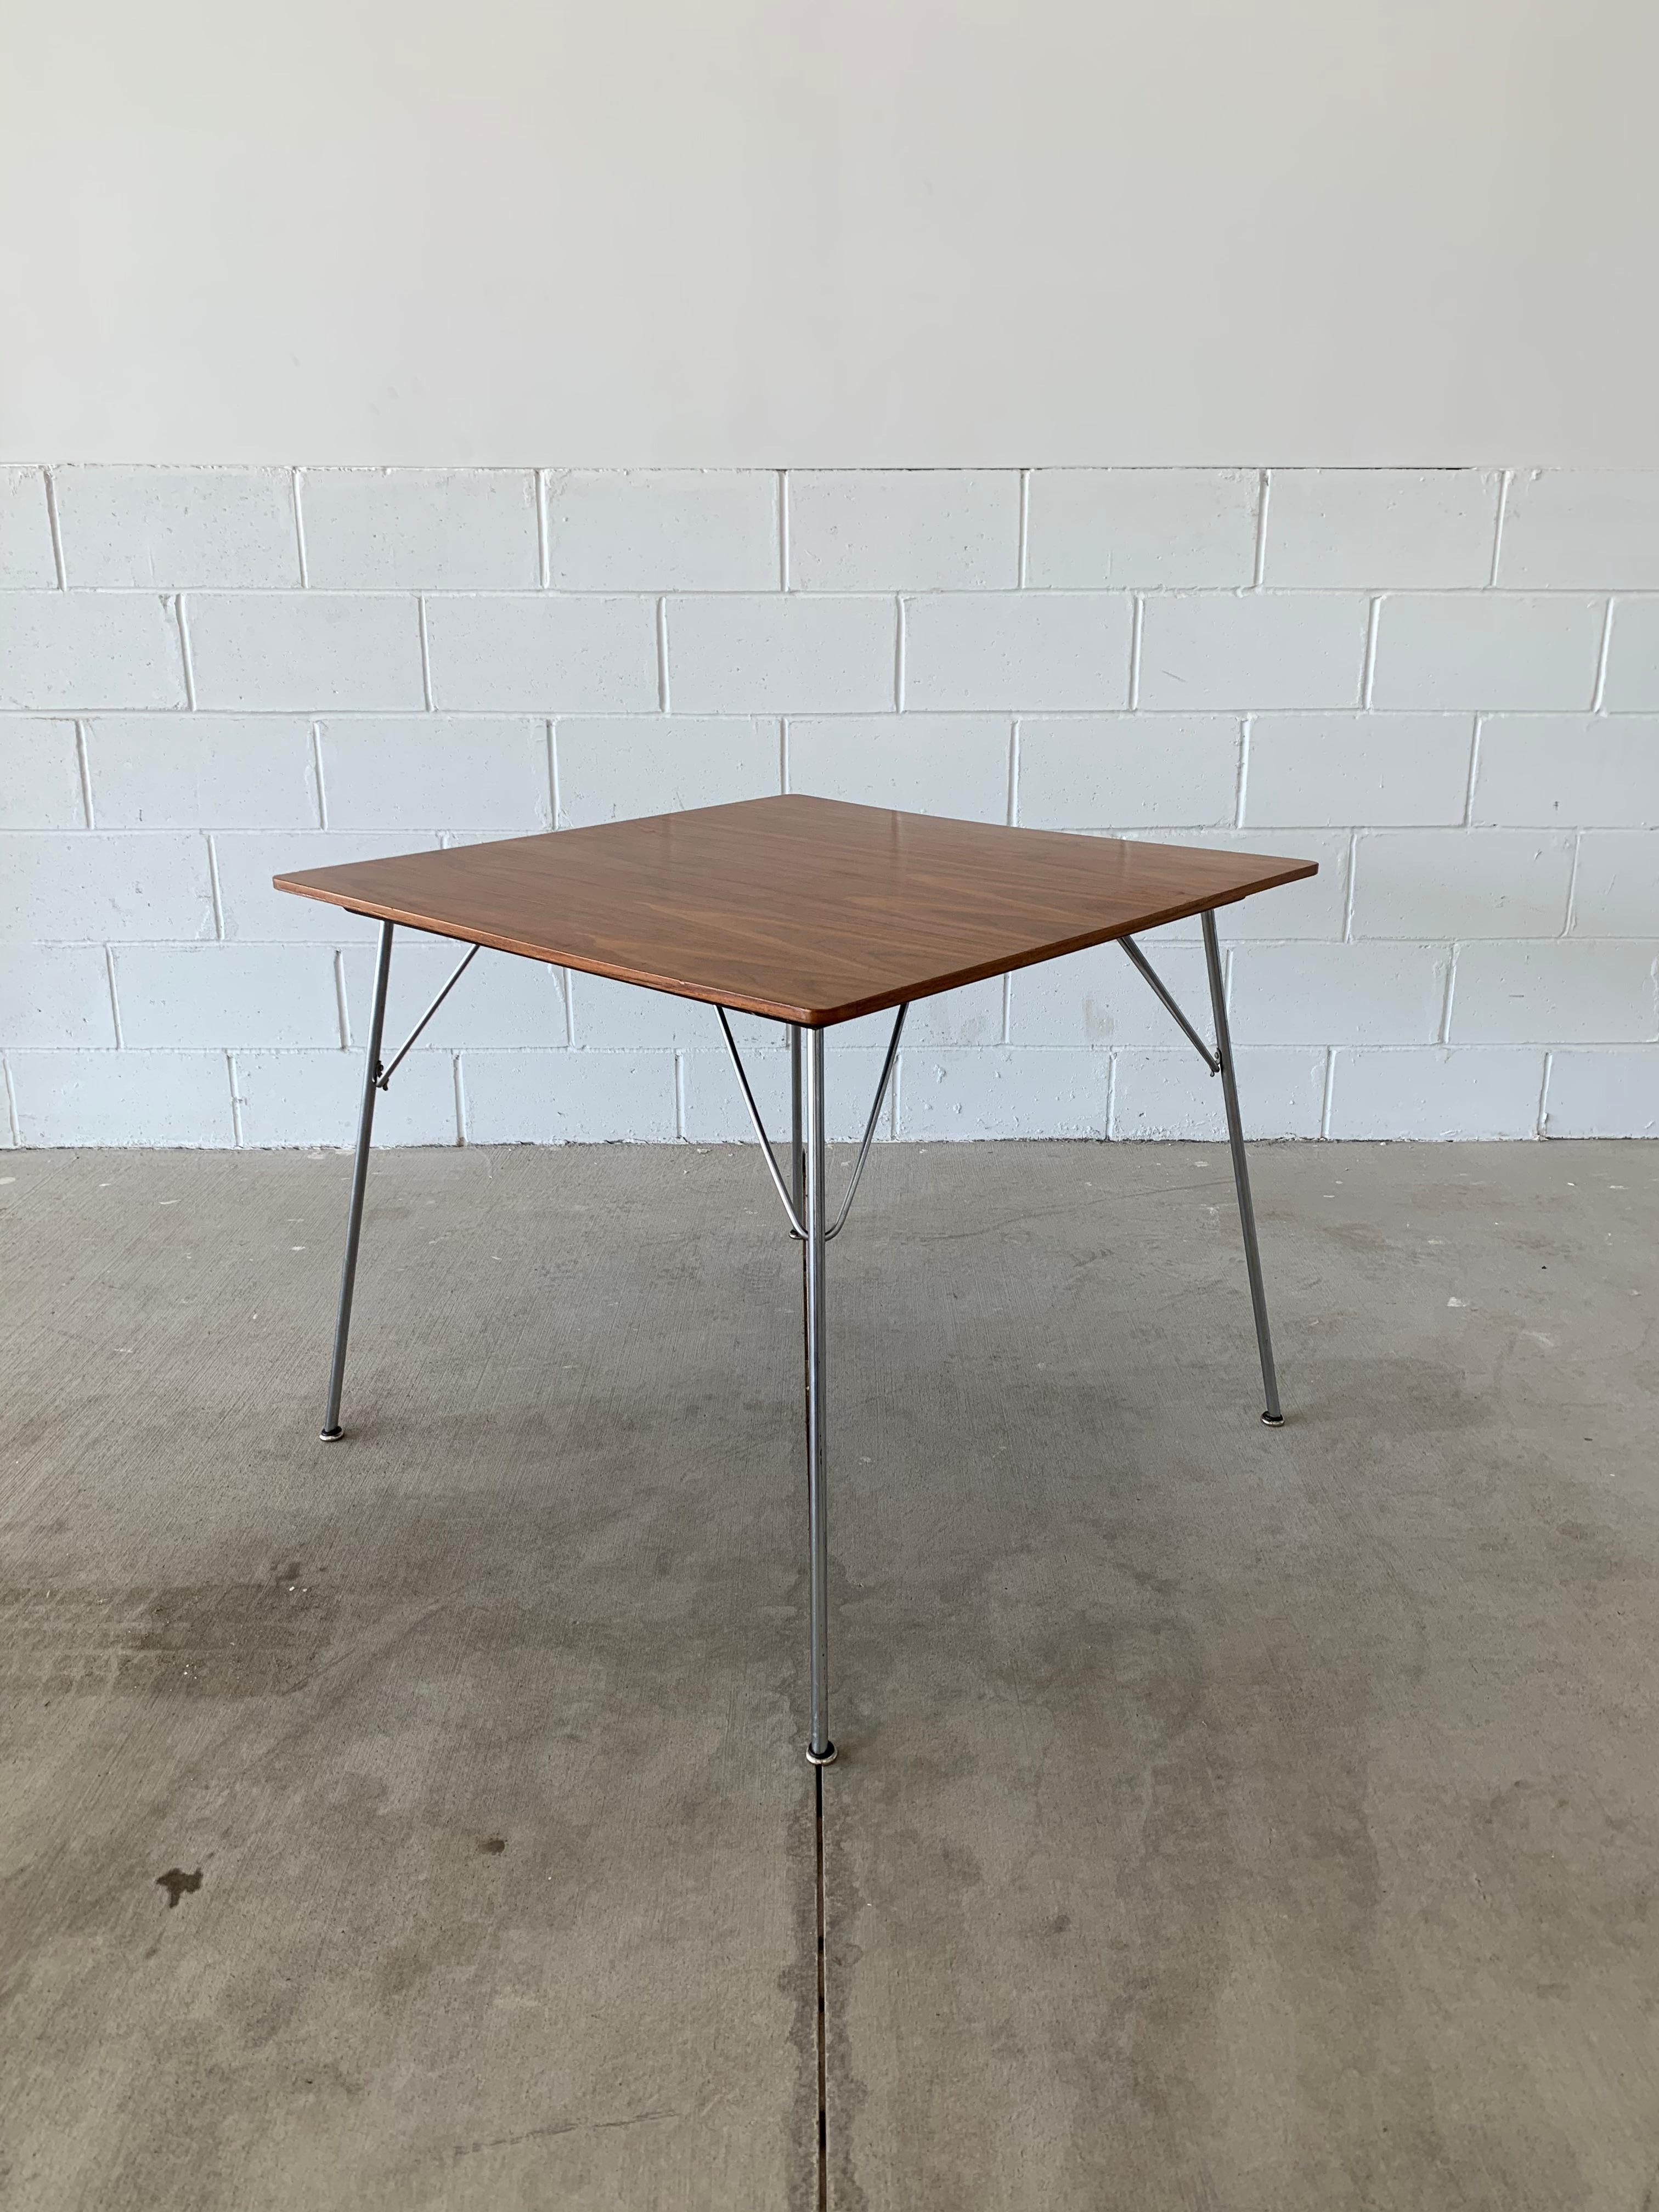 This beautiful Vintage DTM2 Table by Ray and Charles Eames is a stunning addition to any home or office. Manufactured by Herman Miller, it is constructed with a walnut top, black painted underside, and polished metal legs with original 